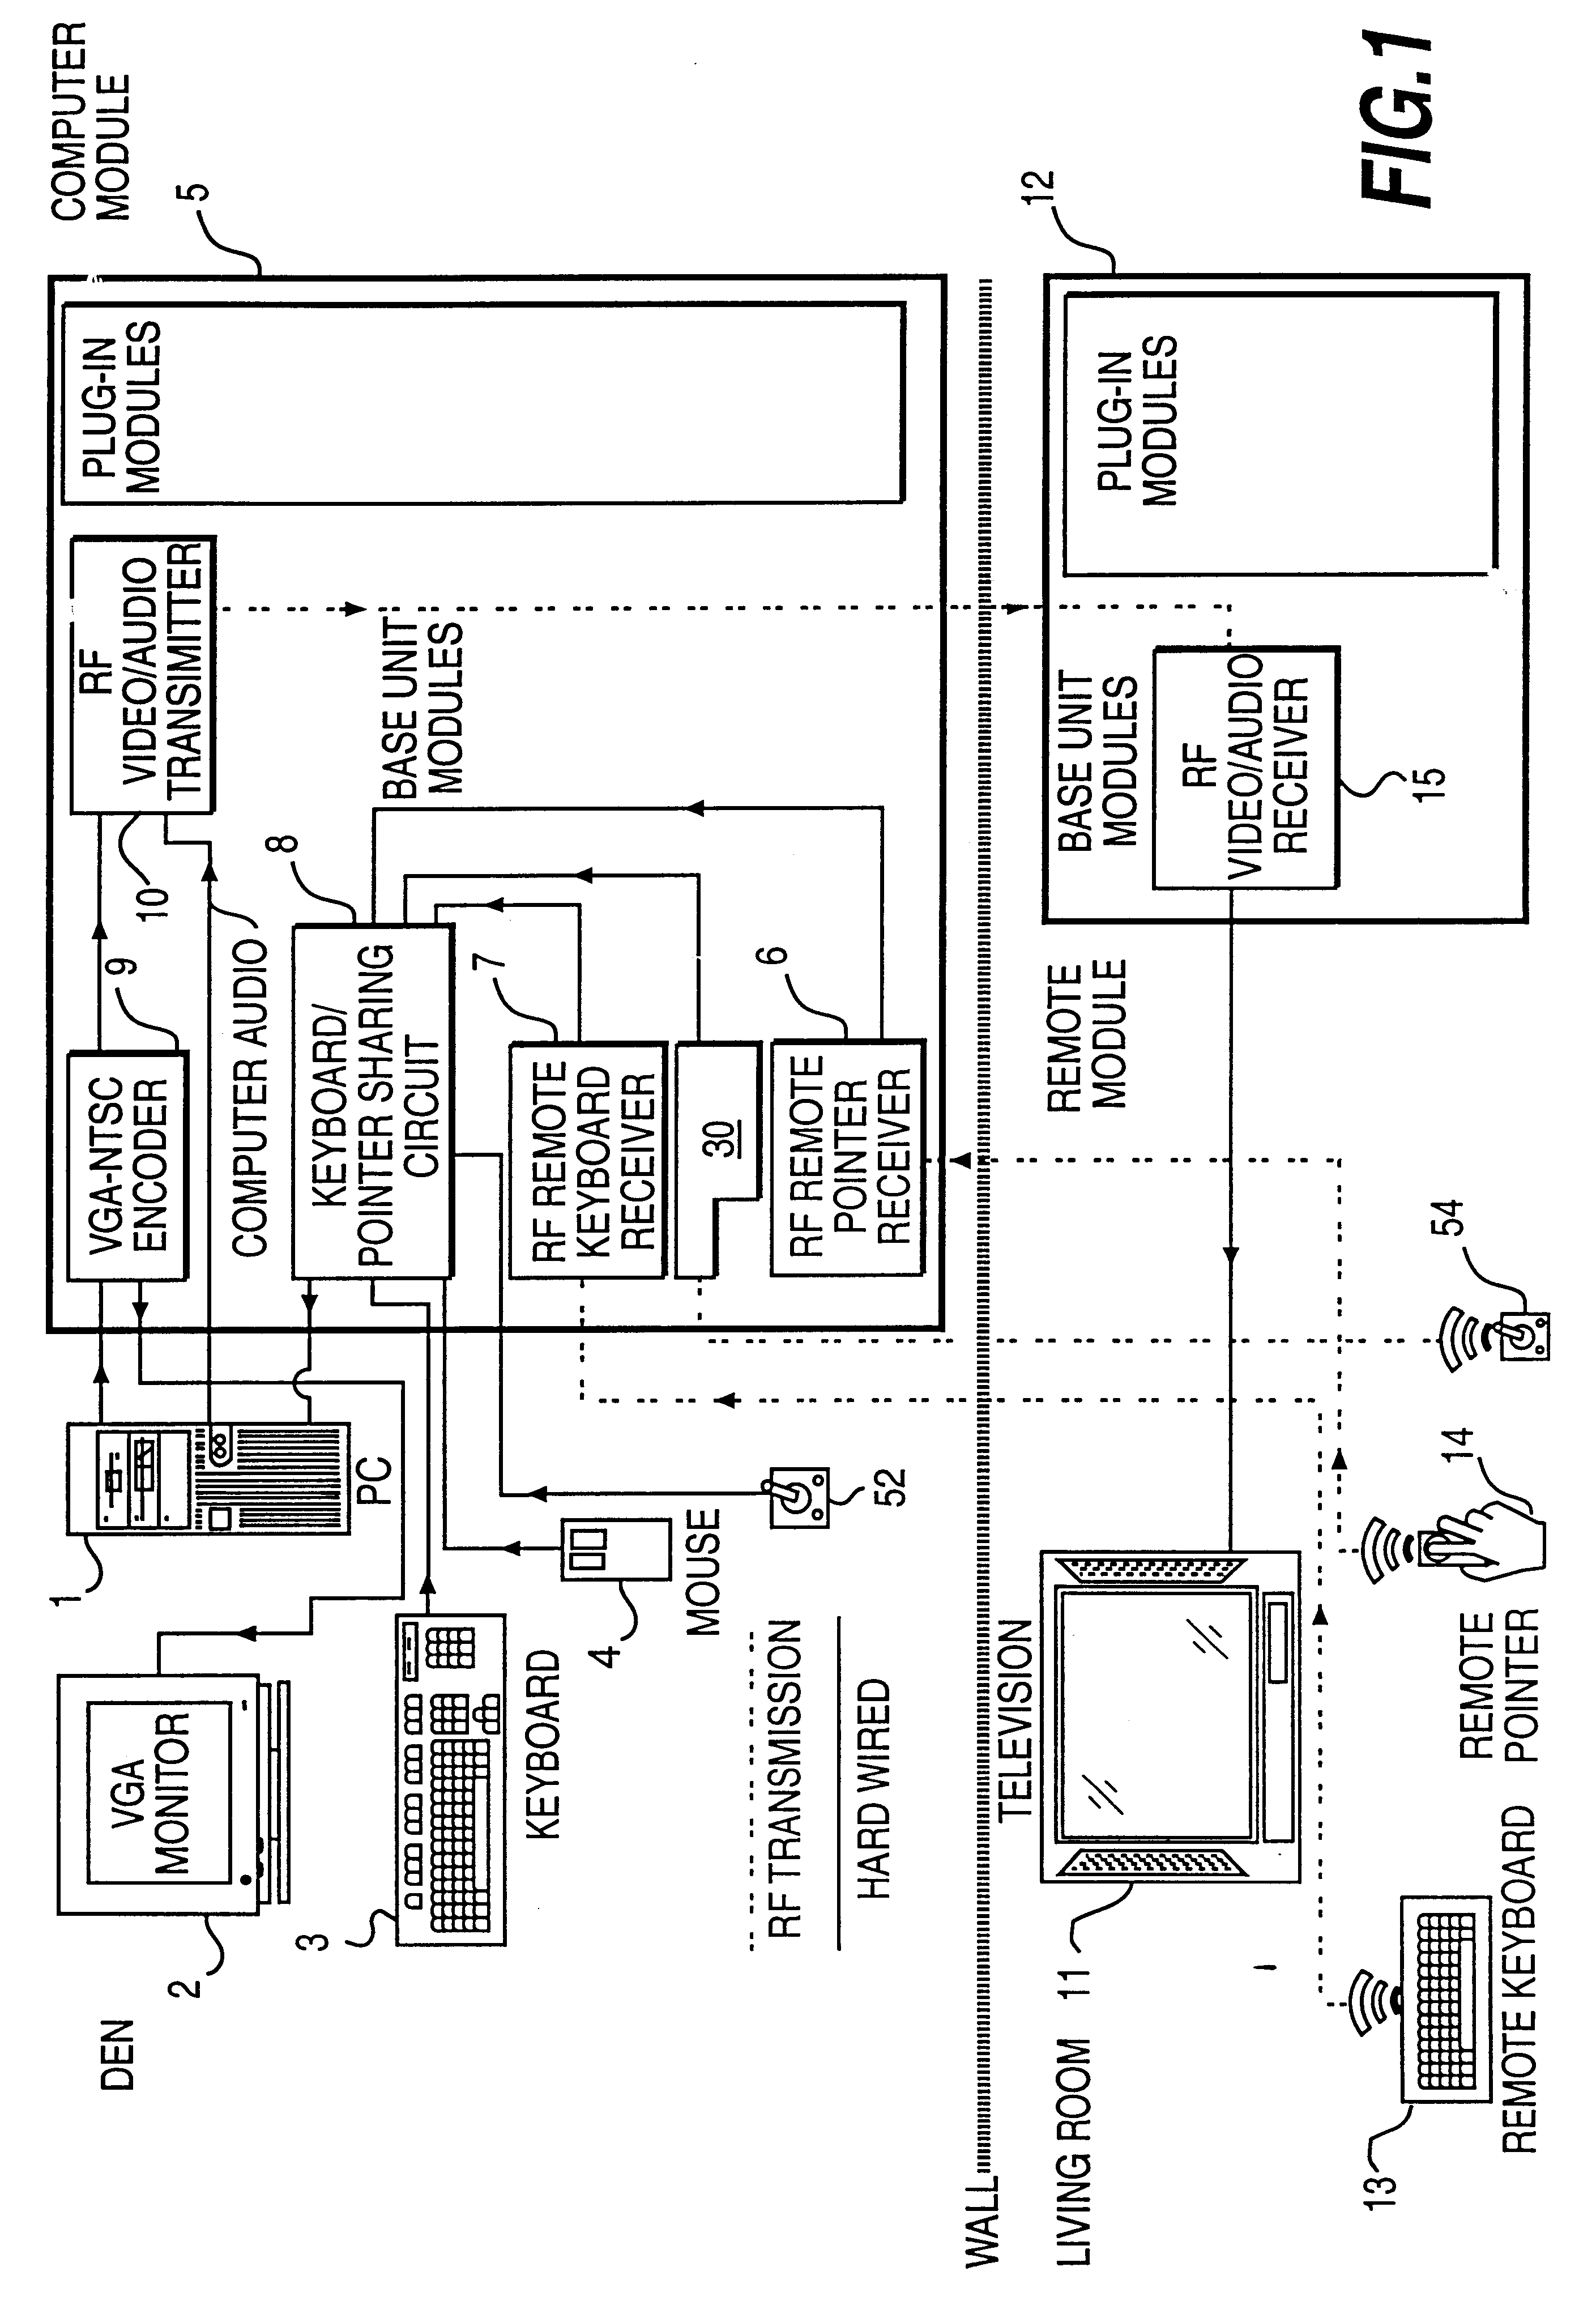 Integrated remote controlled computer and television system